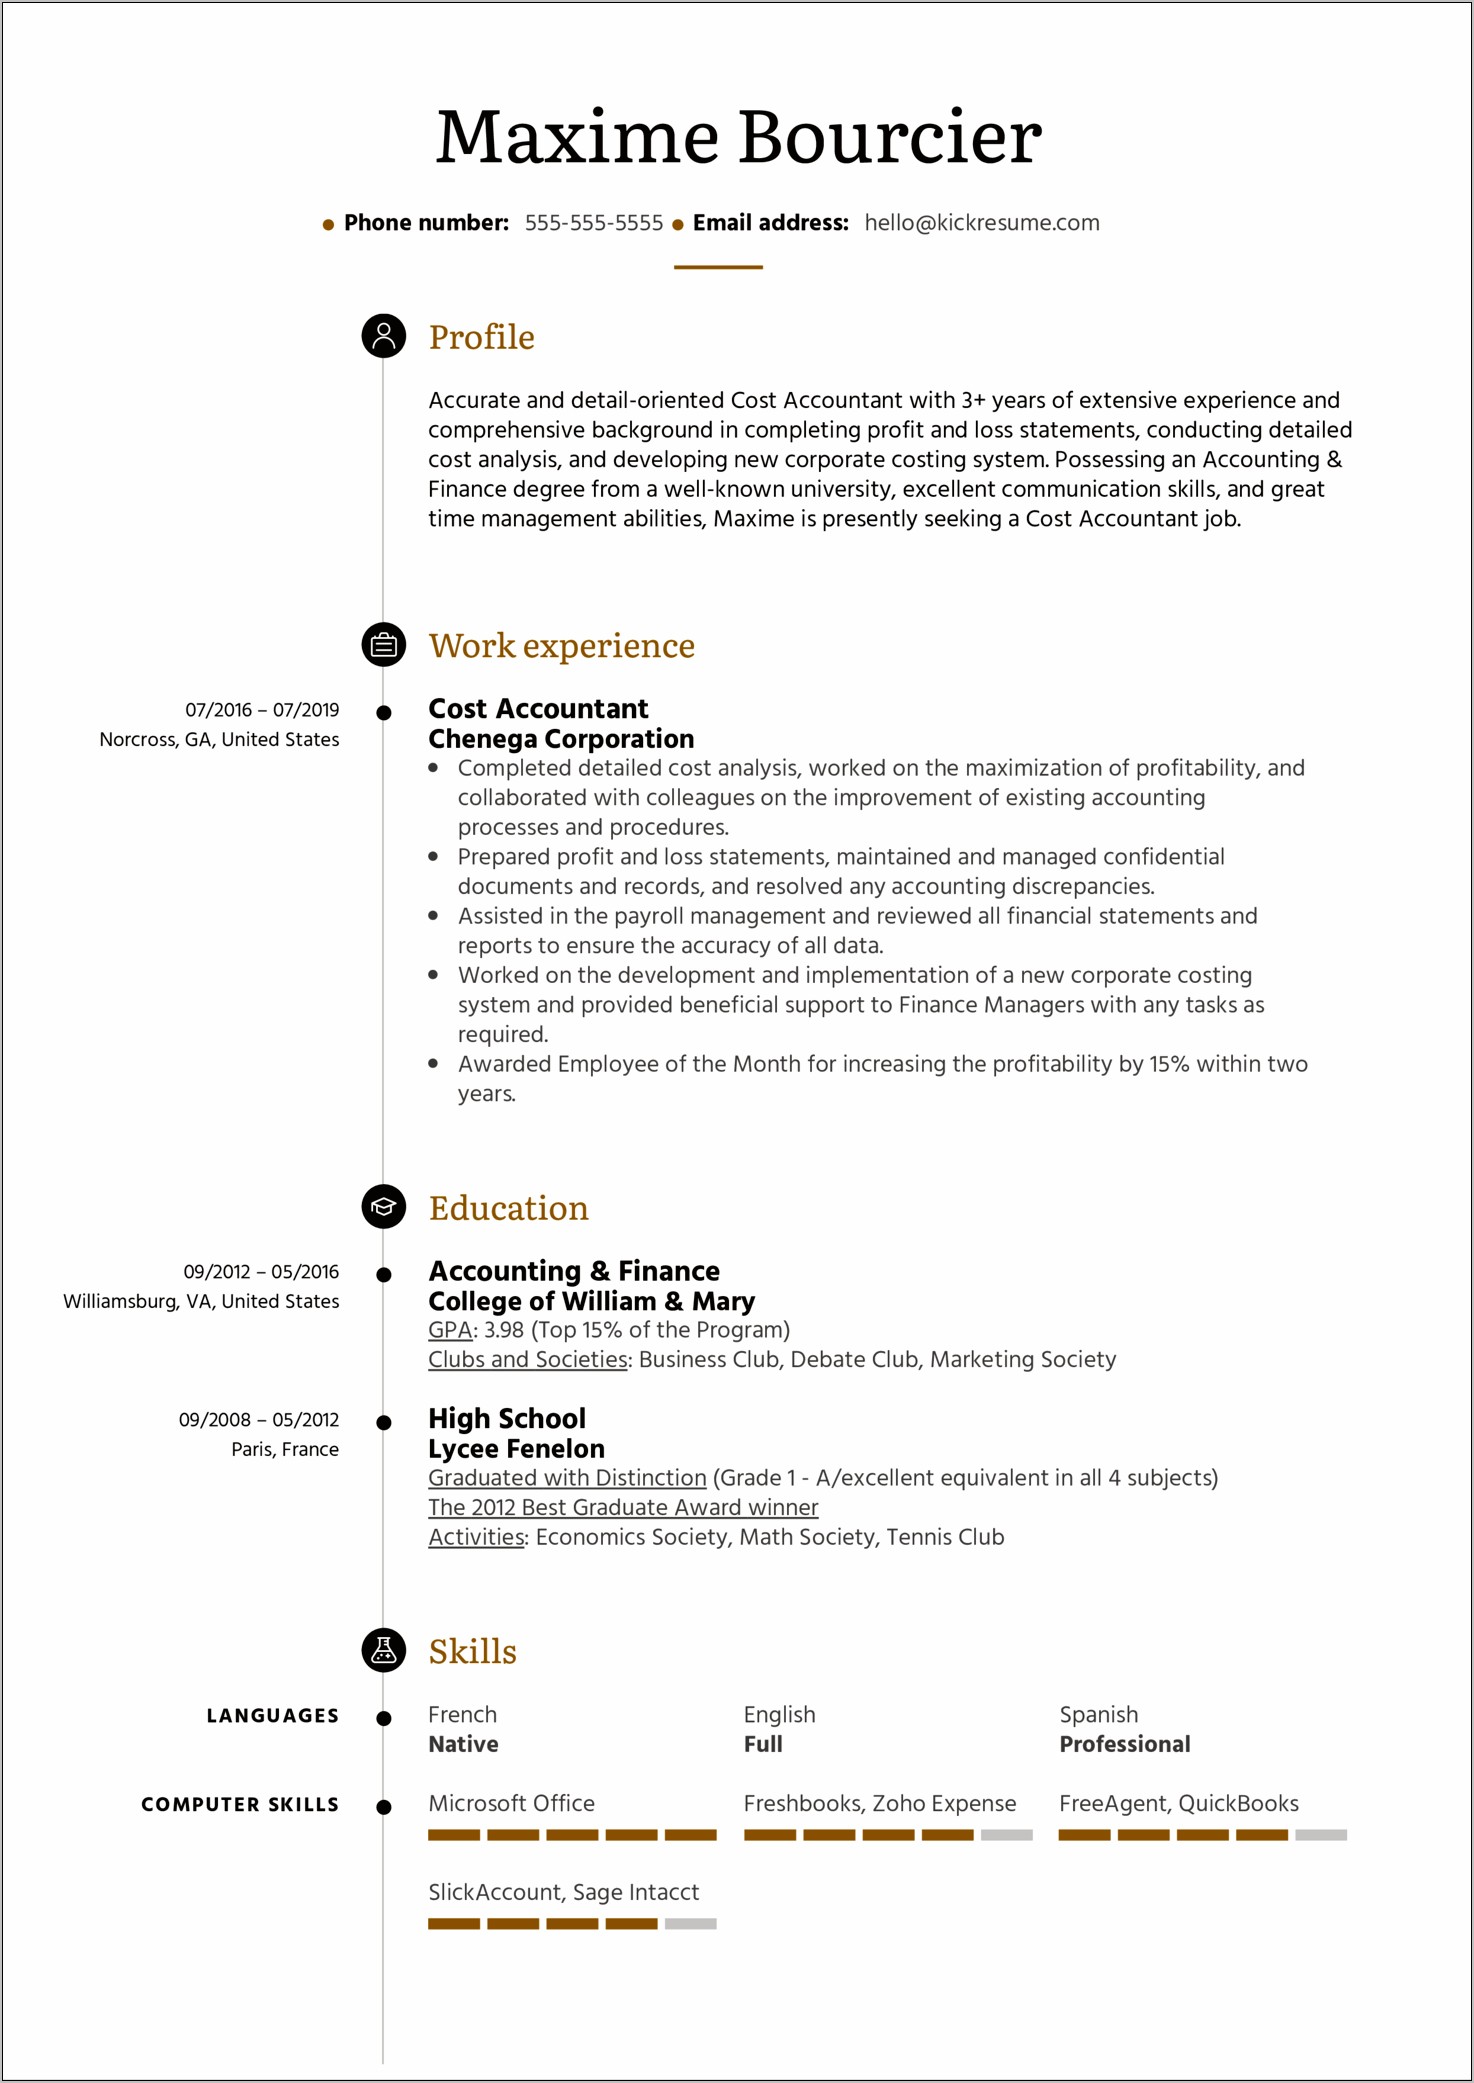 Resume Skills And Abilities Accounting